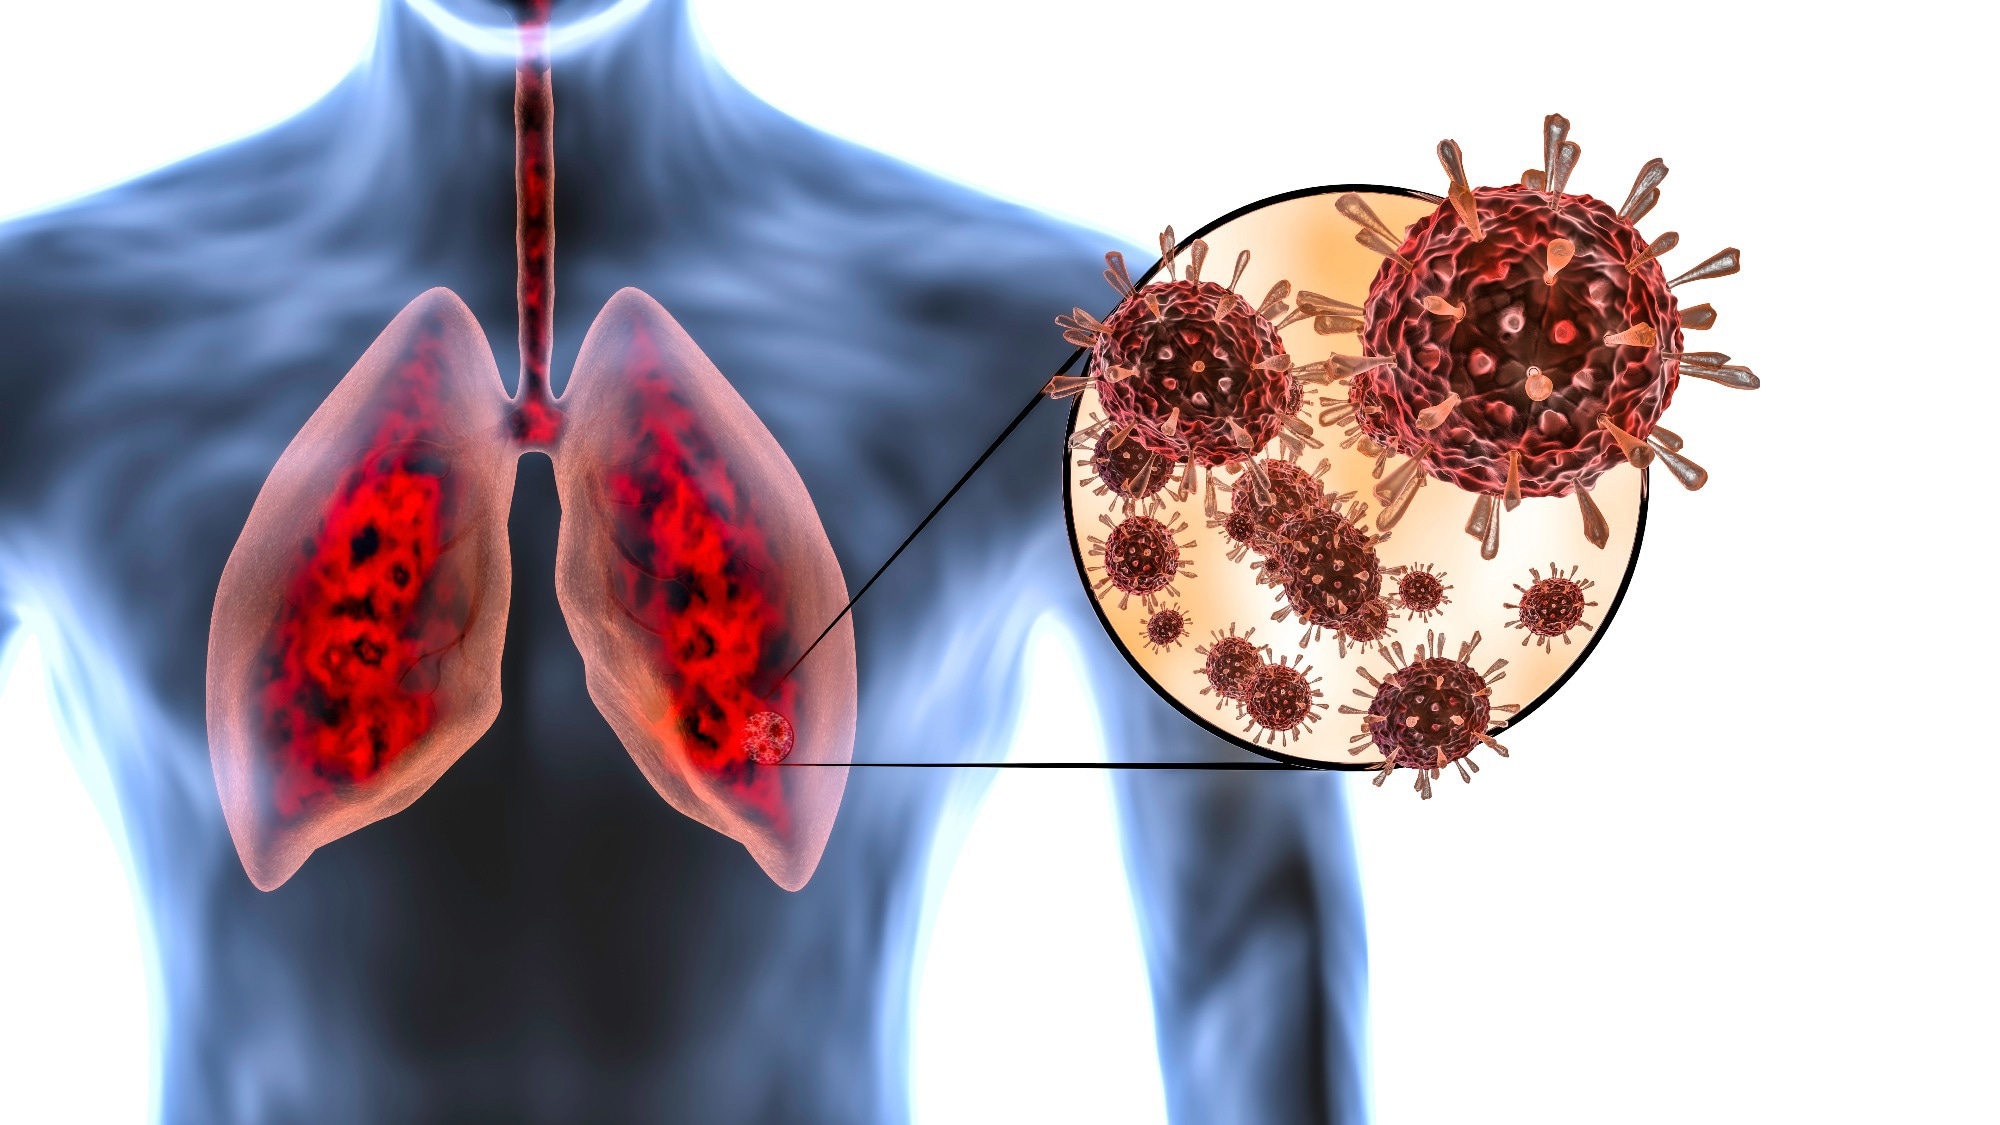 Study: One-Fourth of COVID-19 Patients Have an Impaired Pulmonary Function after 12 Months of Illness Onset. Image Credit: MarcinWojc / Shutterstock